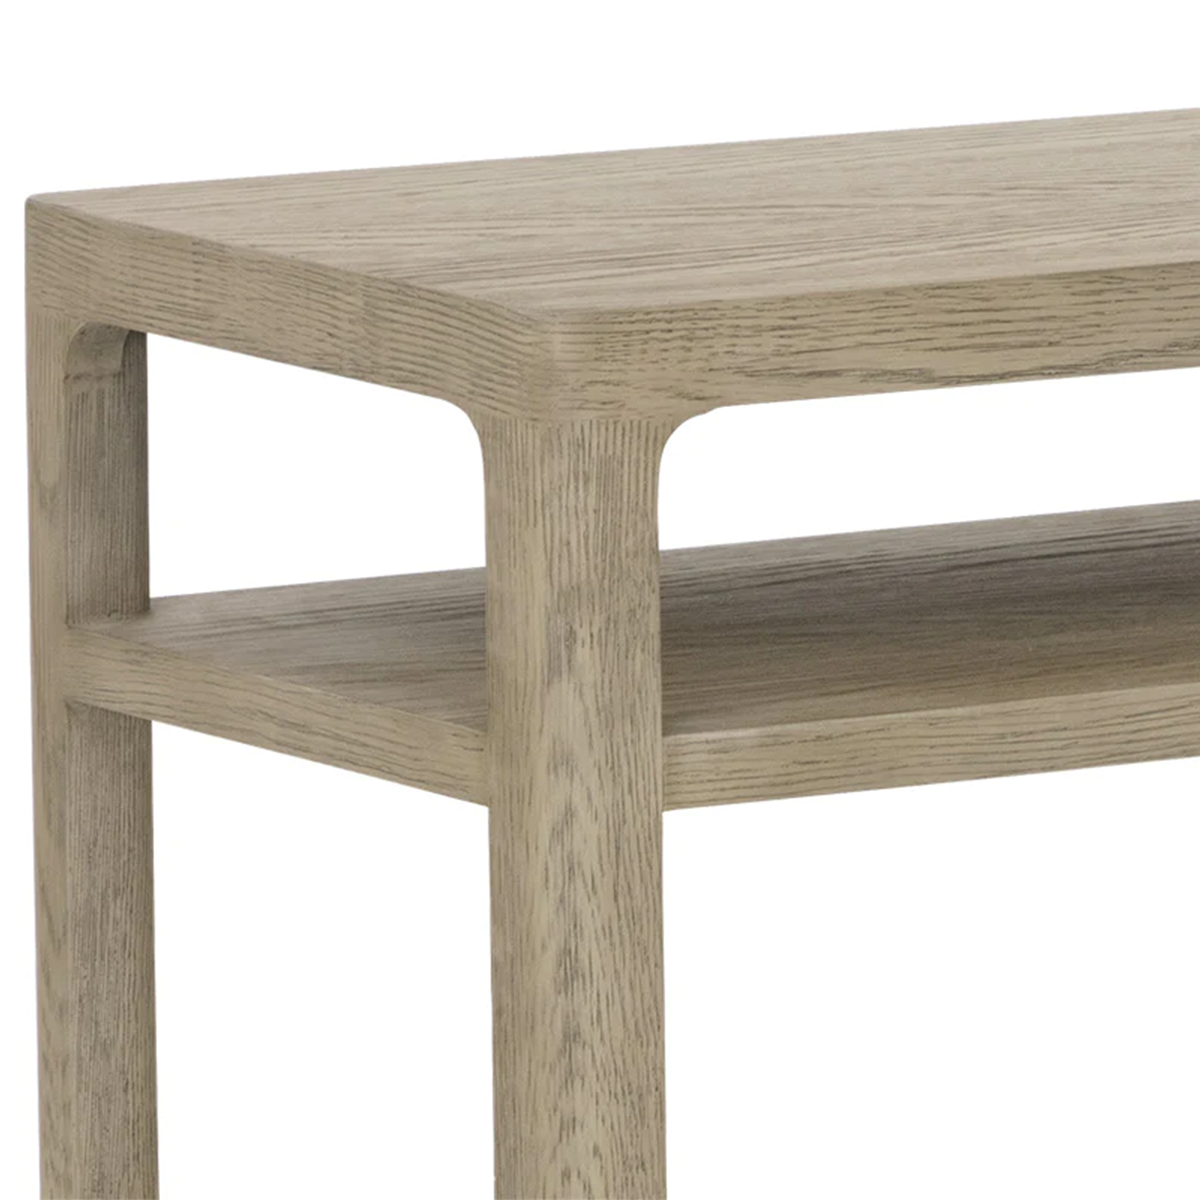 Doncaster Console Table by Sunpan Close image of the Material